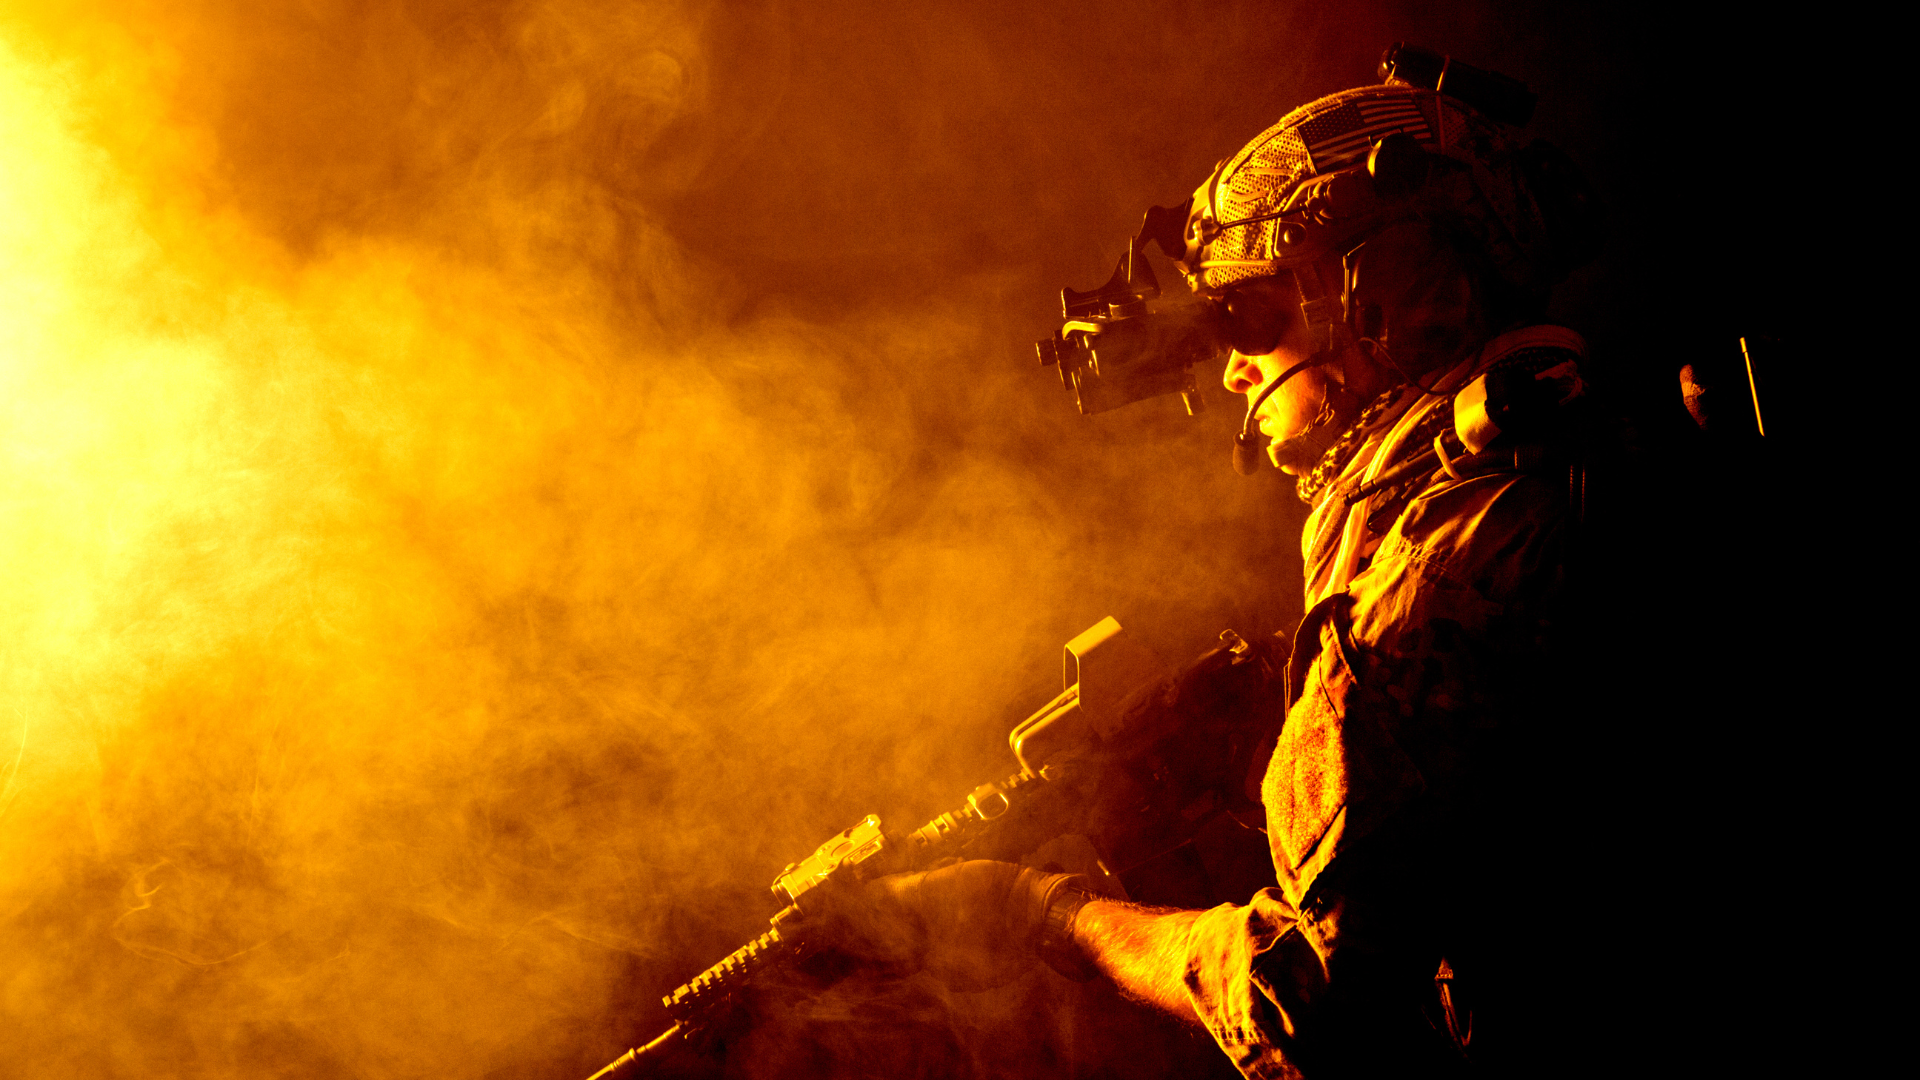 night vision soldier standing in smoke and he is looking through night vision